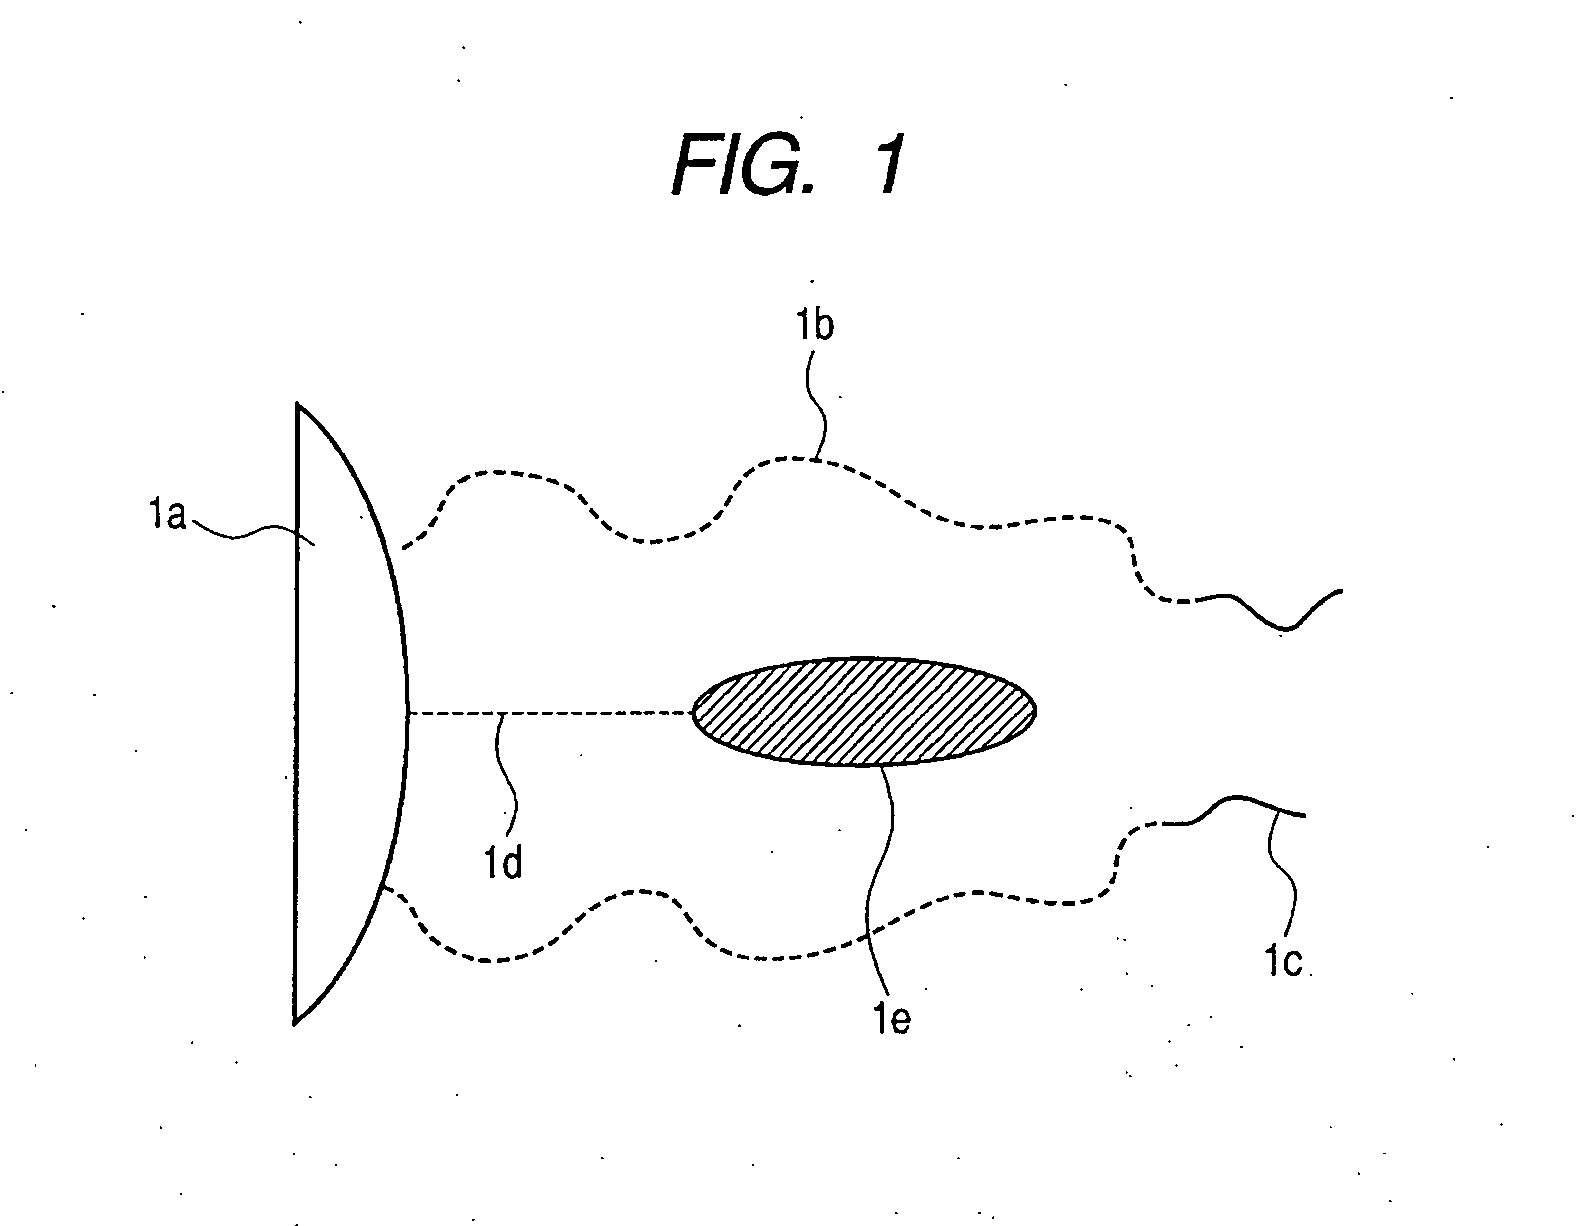 Structure for separation of physiologically active agent and method for recovering physiologically active agent